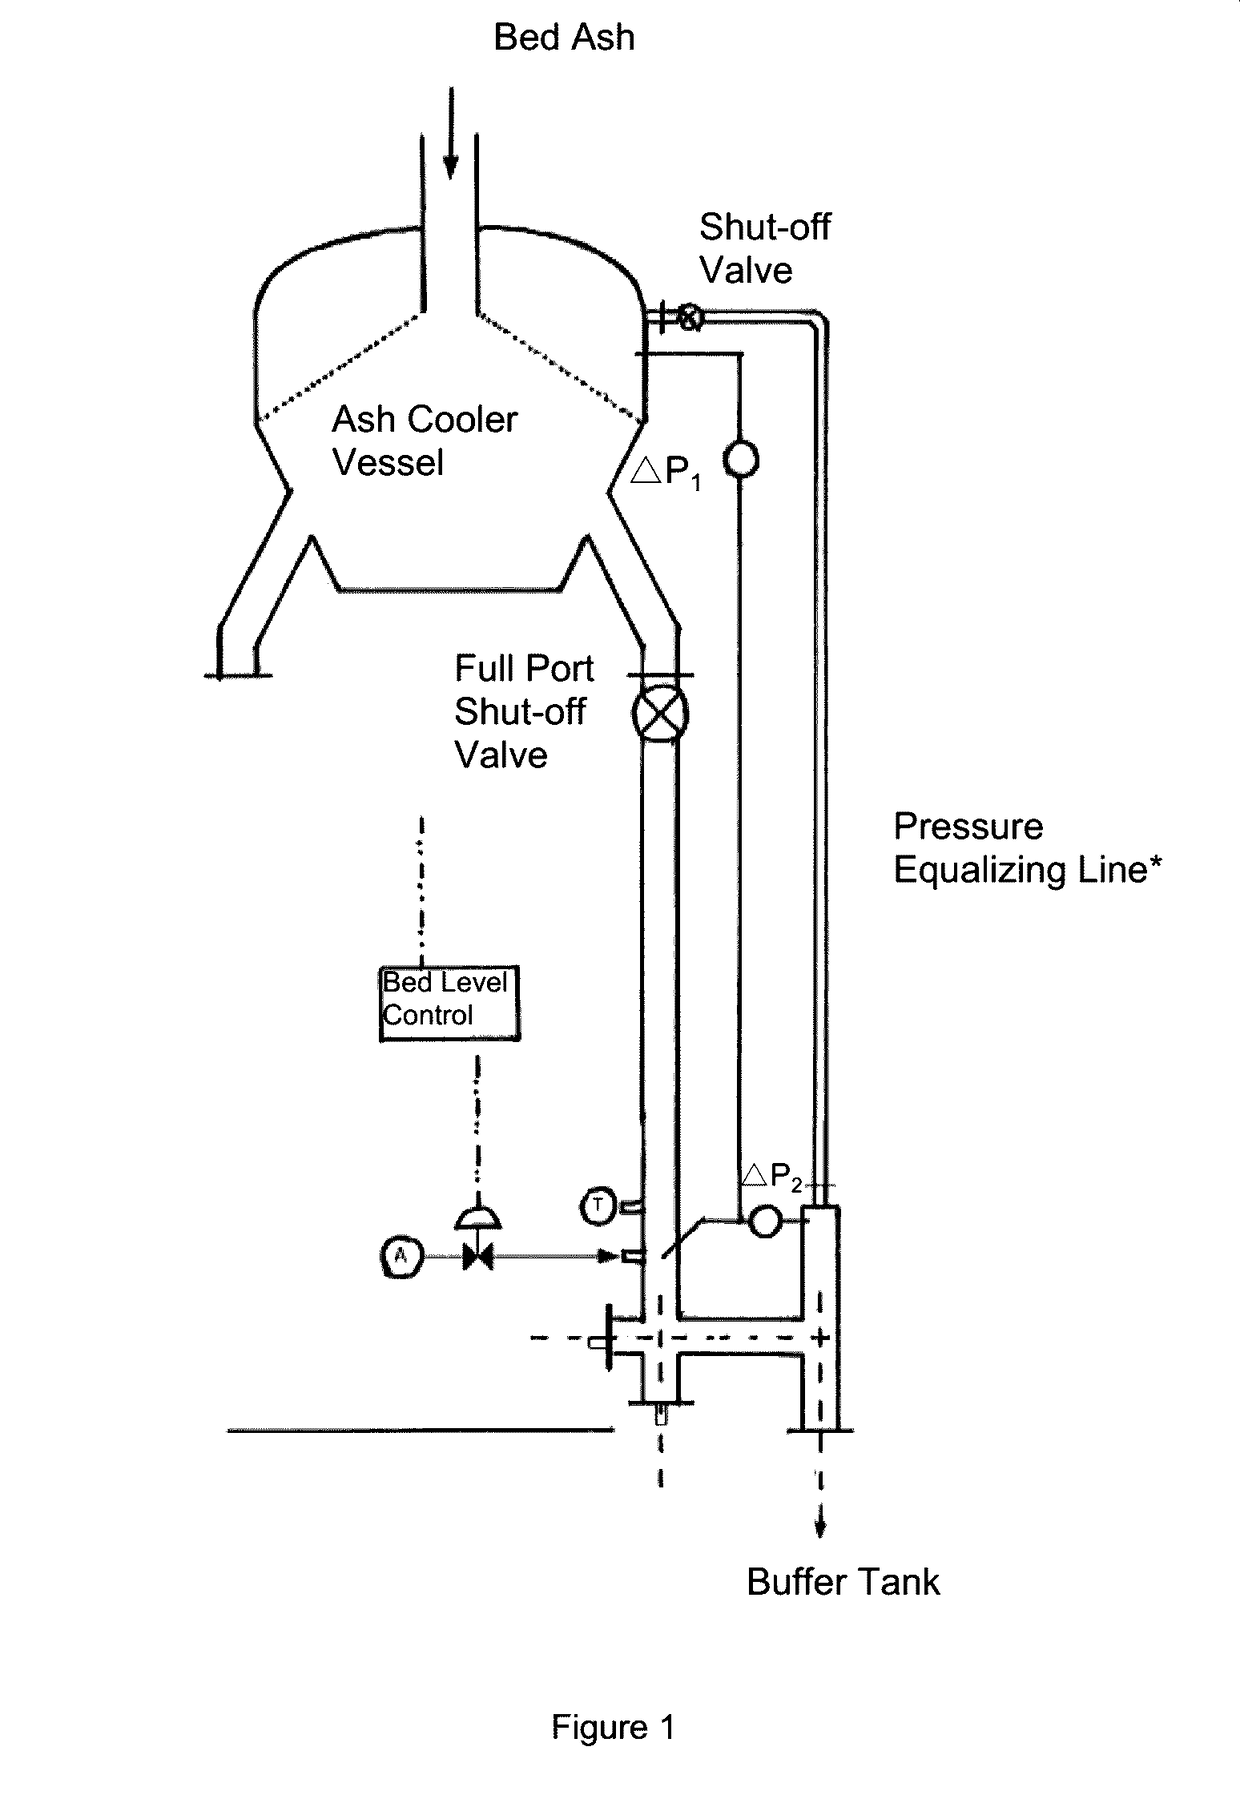 High temperature and pressure solids handling system